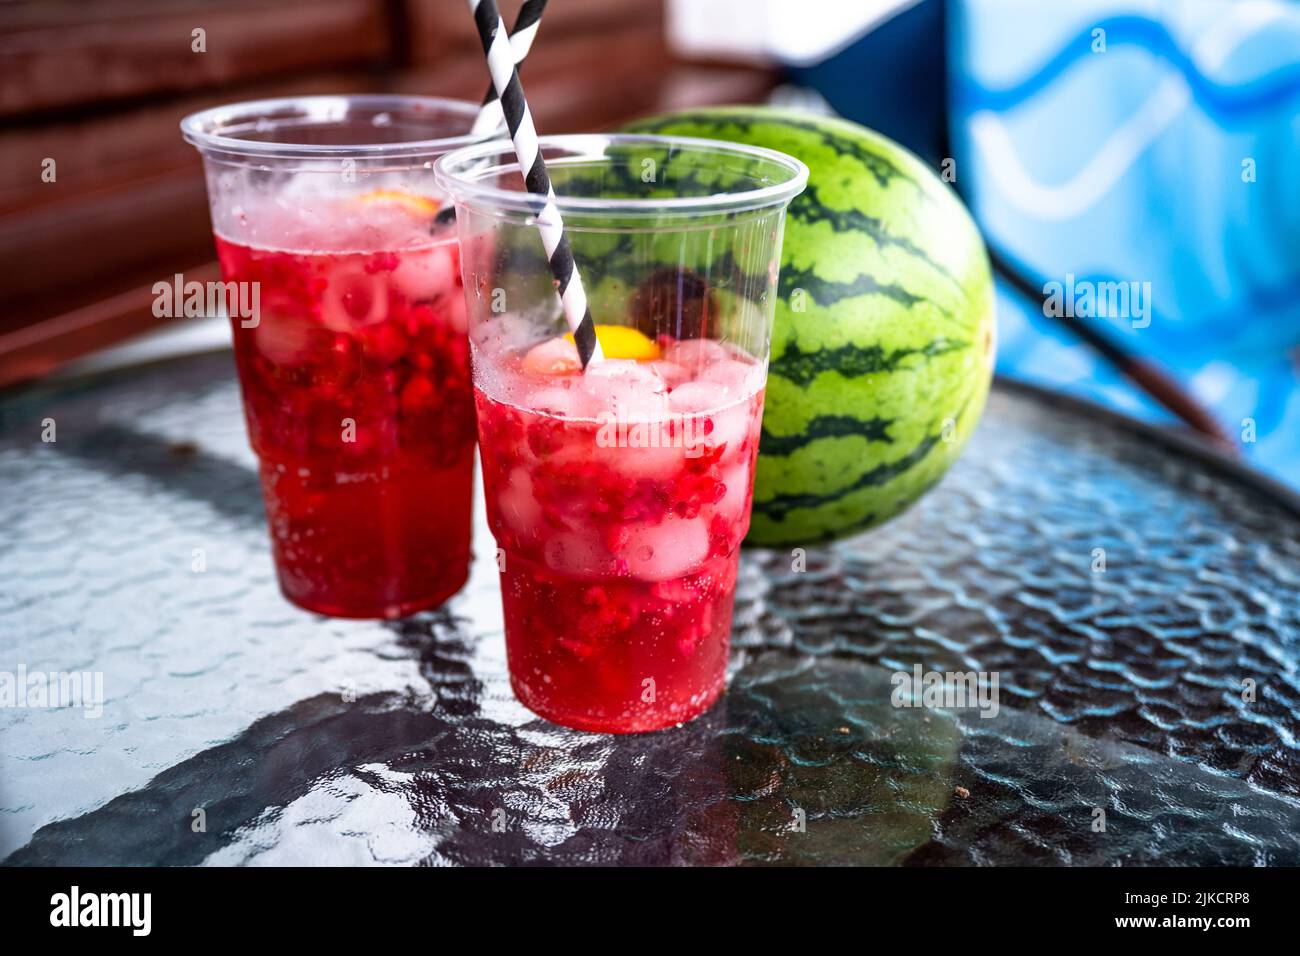 Two plastic cup with red dewy cold fruit homemade lemonade with paper straw, whole watermelone on glass table, blue and brown background. Stock Photo